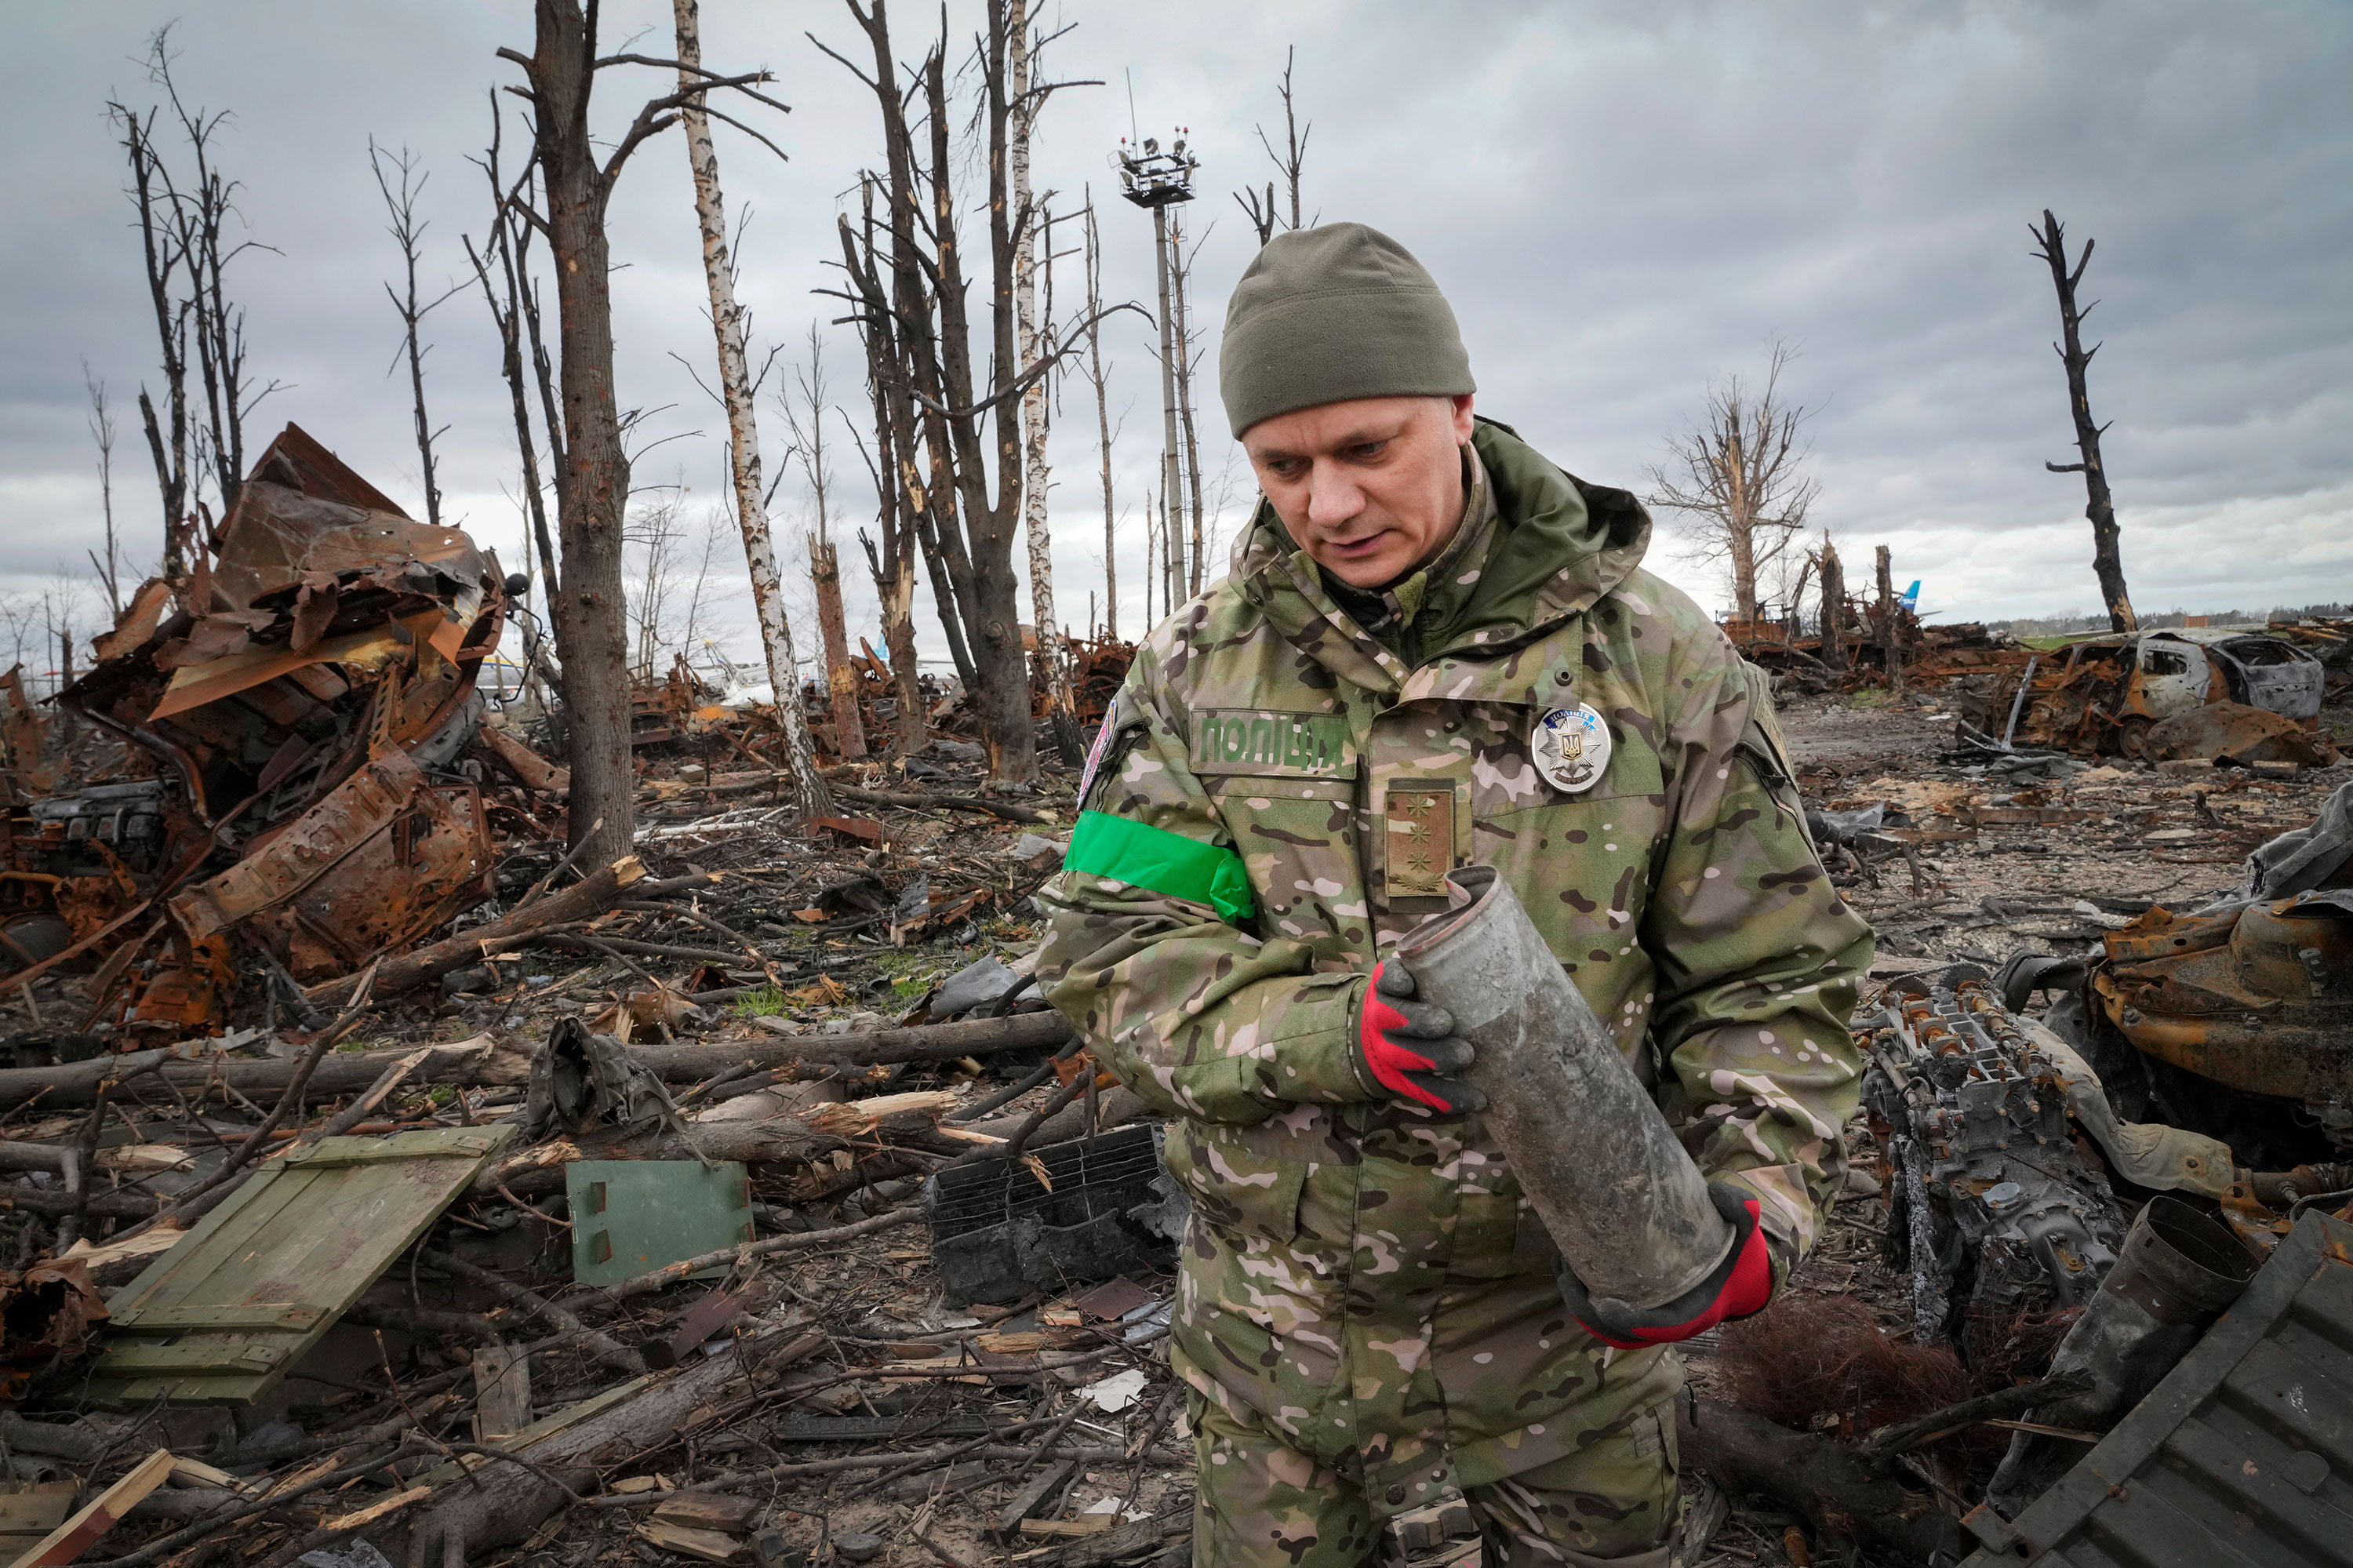 An interior ministry sapper collects unexploded ordnance in Hostomel, Ukraine, on April 18.